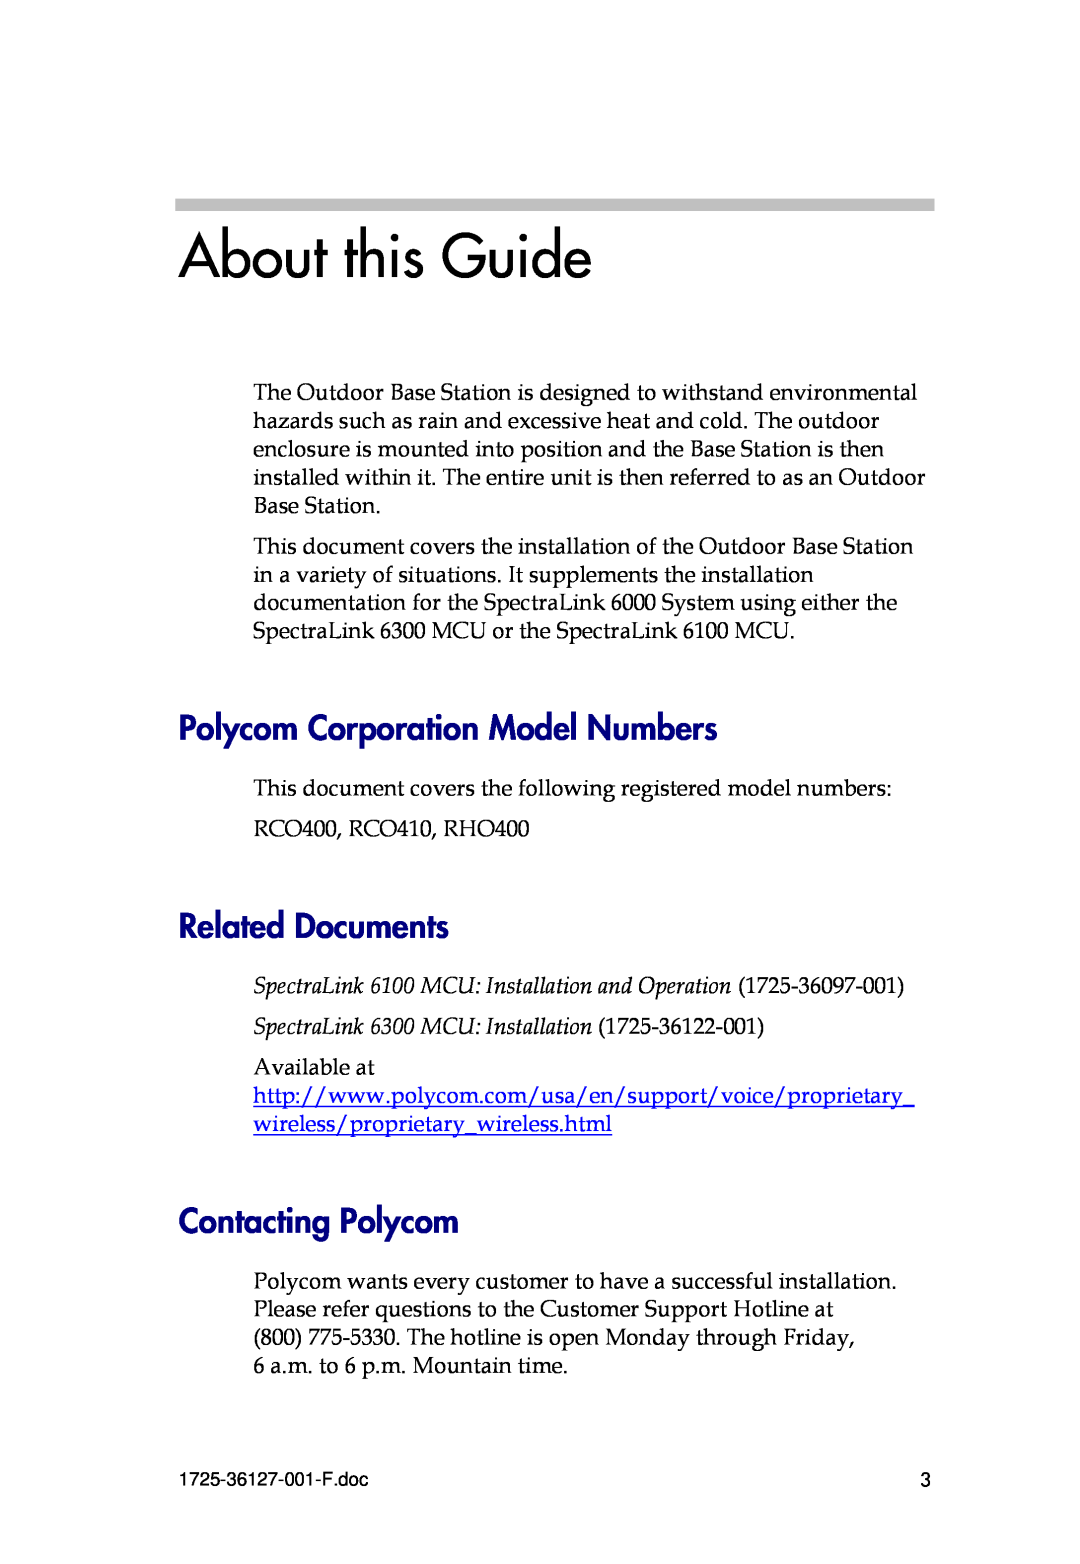 Polycom 6000 manual About this Guide, Polycom Corporation Model Numbers, Related Documents, Contacting Polycom 